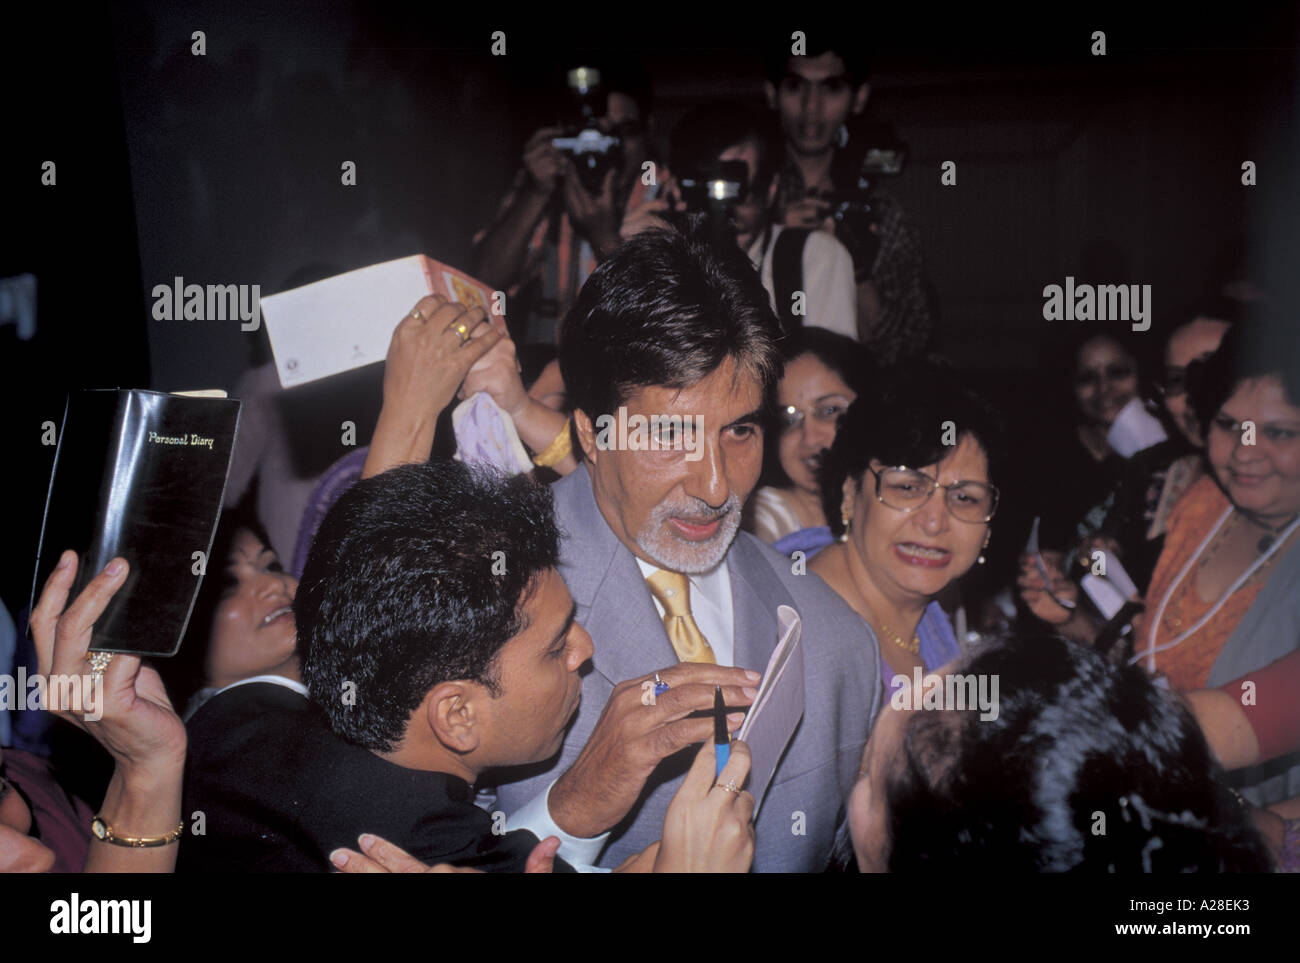 Indian Bollywood Film Star Actor Amitabh Bachchan surrounded by fans Stock Photo